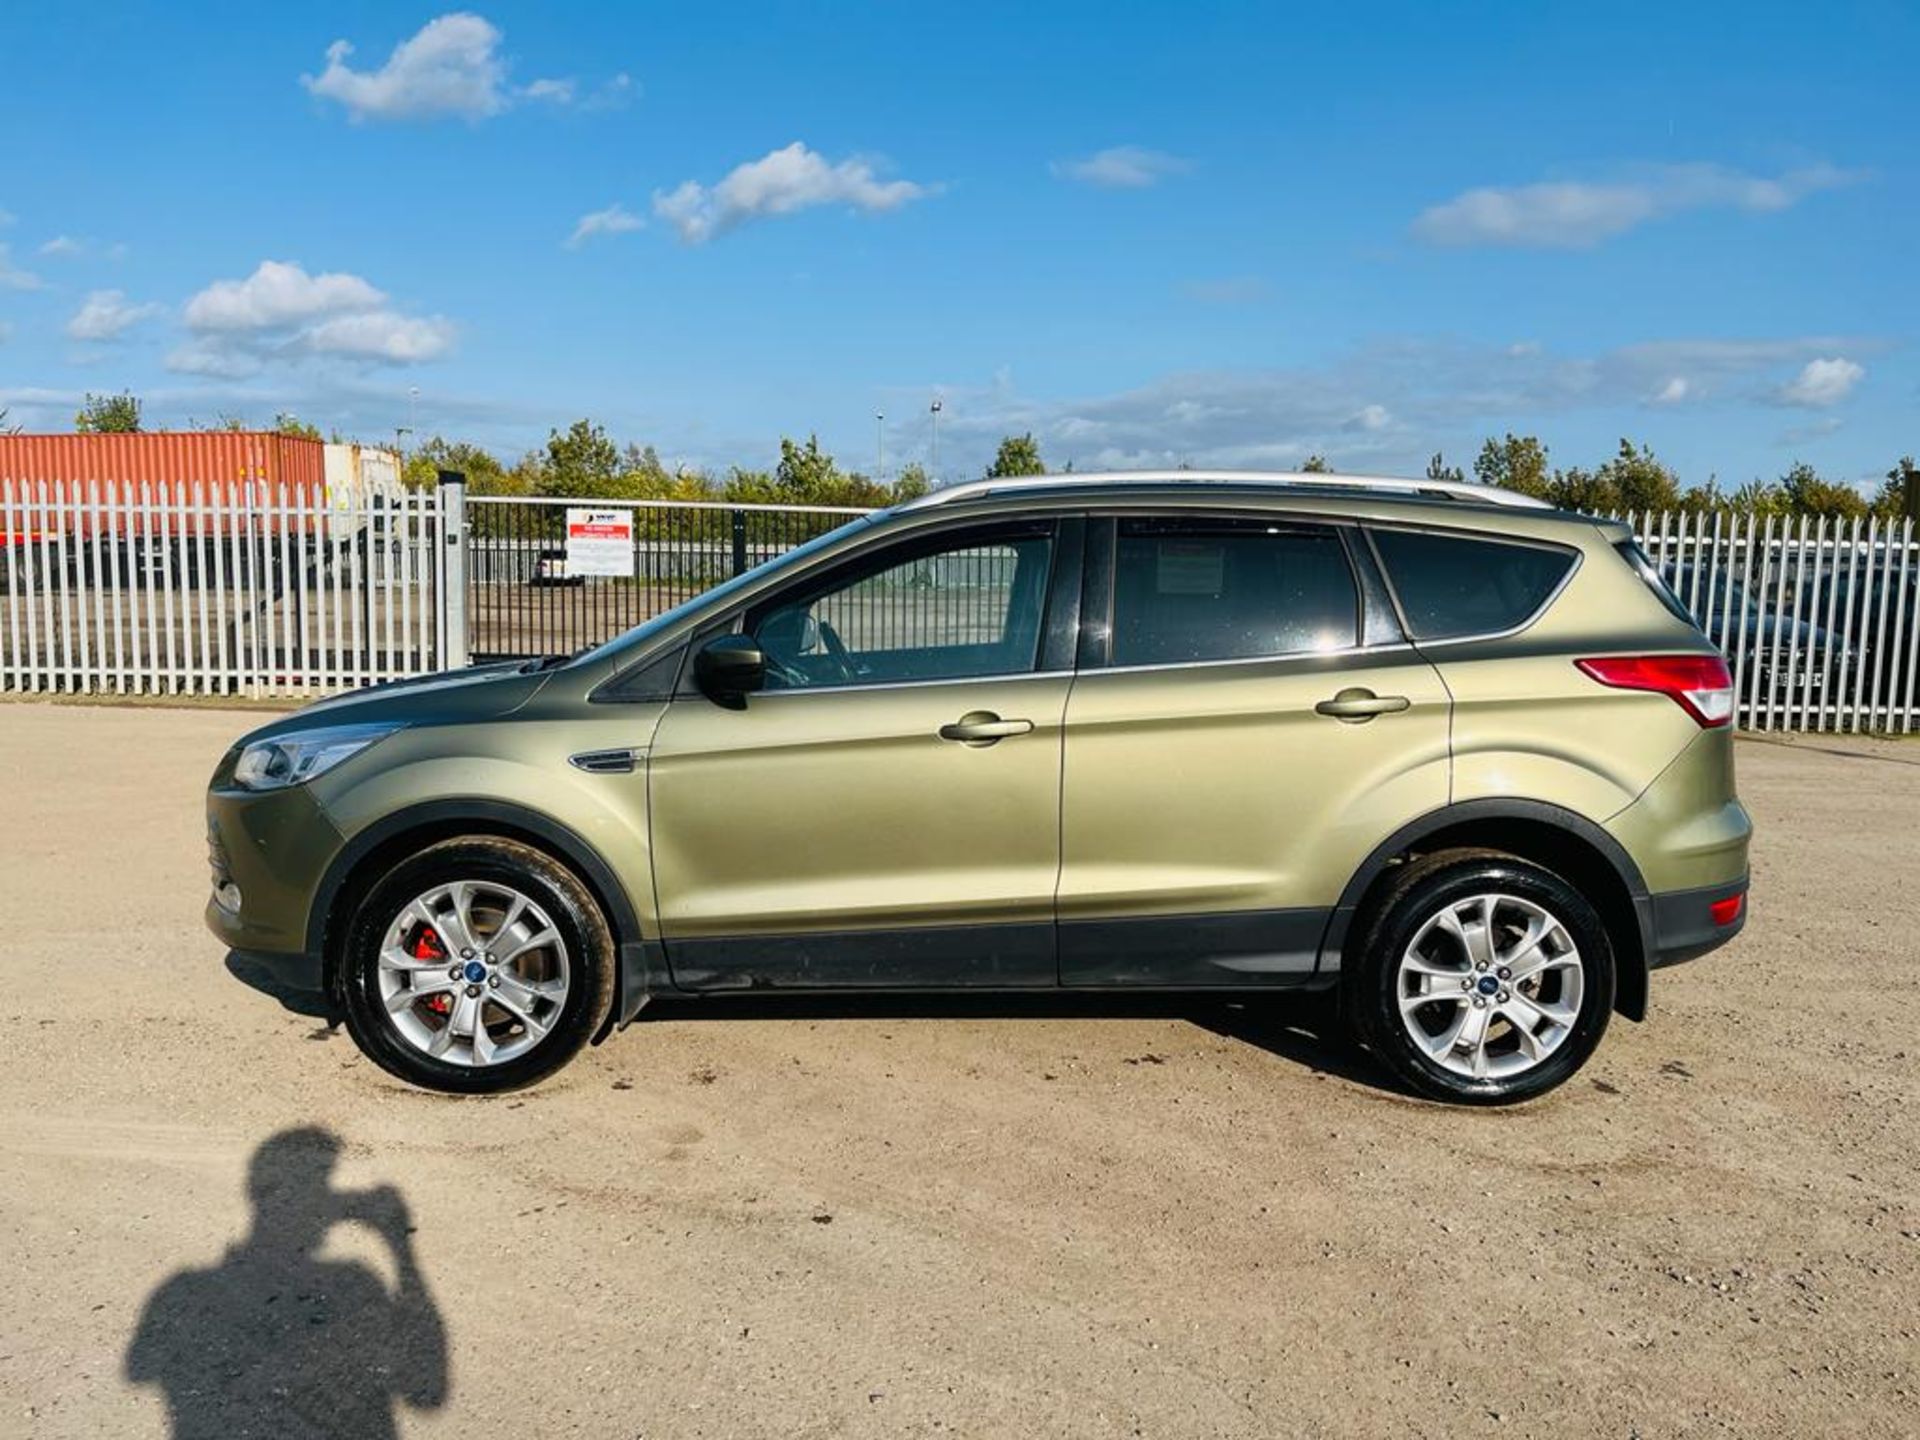 ** ON SALE ** Ford Kuga 2.0 TDCI 163 4WD Titanium 2013 (63 Reg) - No Vat - Air Conditioning - Image 11 of 32